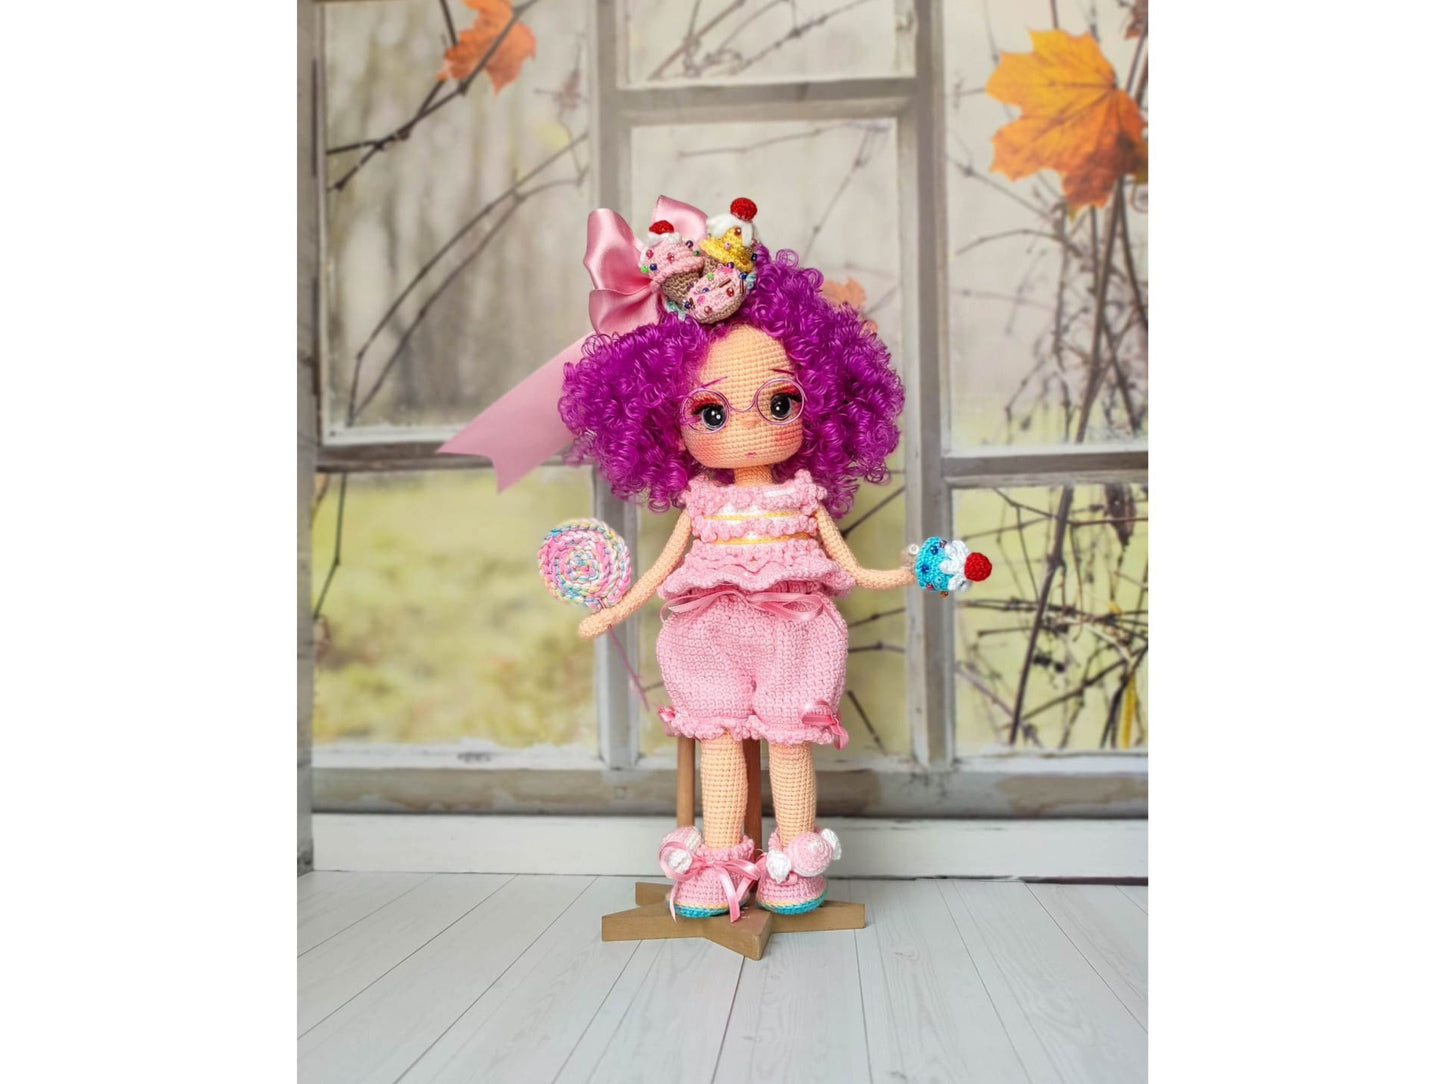 Crochet Doll with Curly Hair, Crochet Doll with Clothes, Doll with Hair